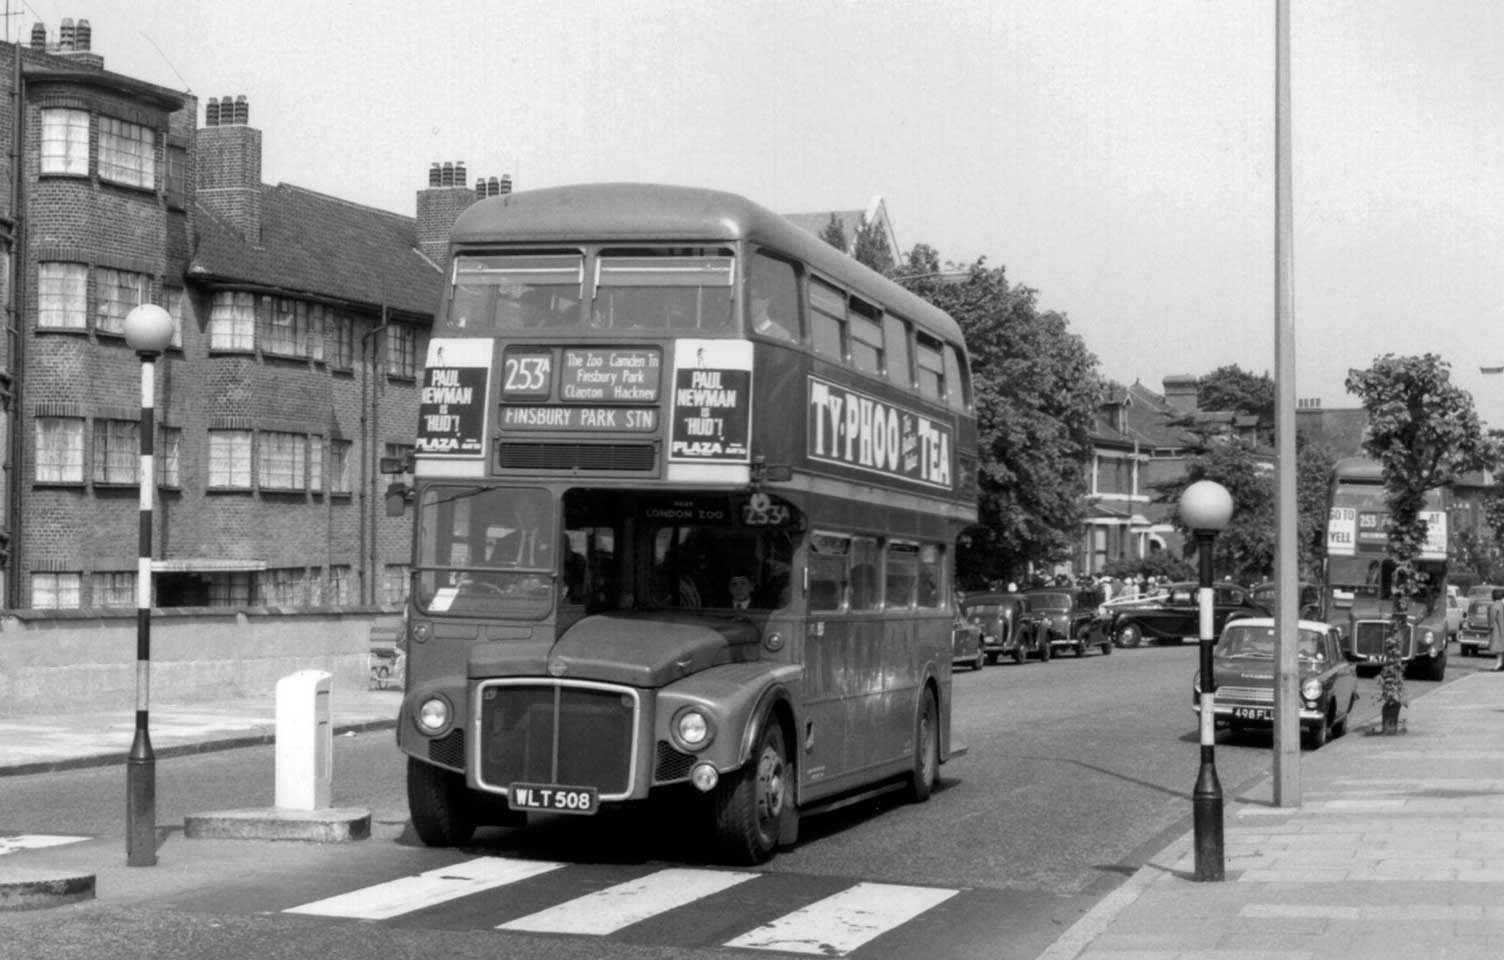 RM408 seen at Stamford Hill